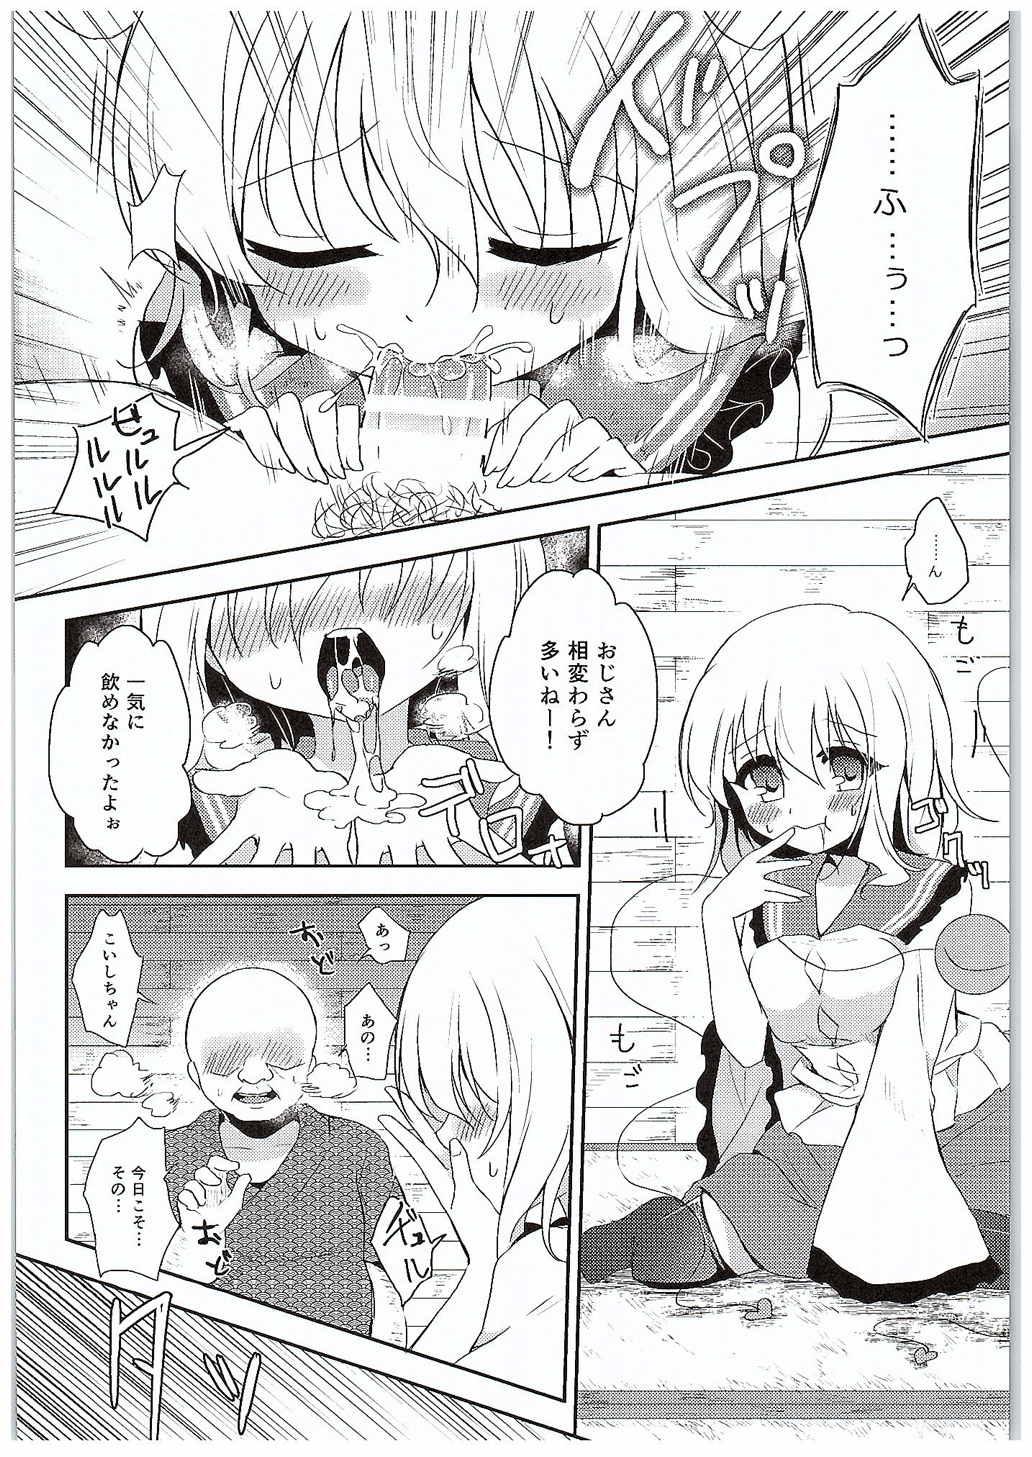 Hiddencam Koishi-chan no Himitsugoto - Touhou project Exposed - Page 4